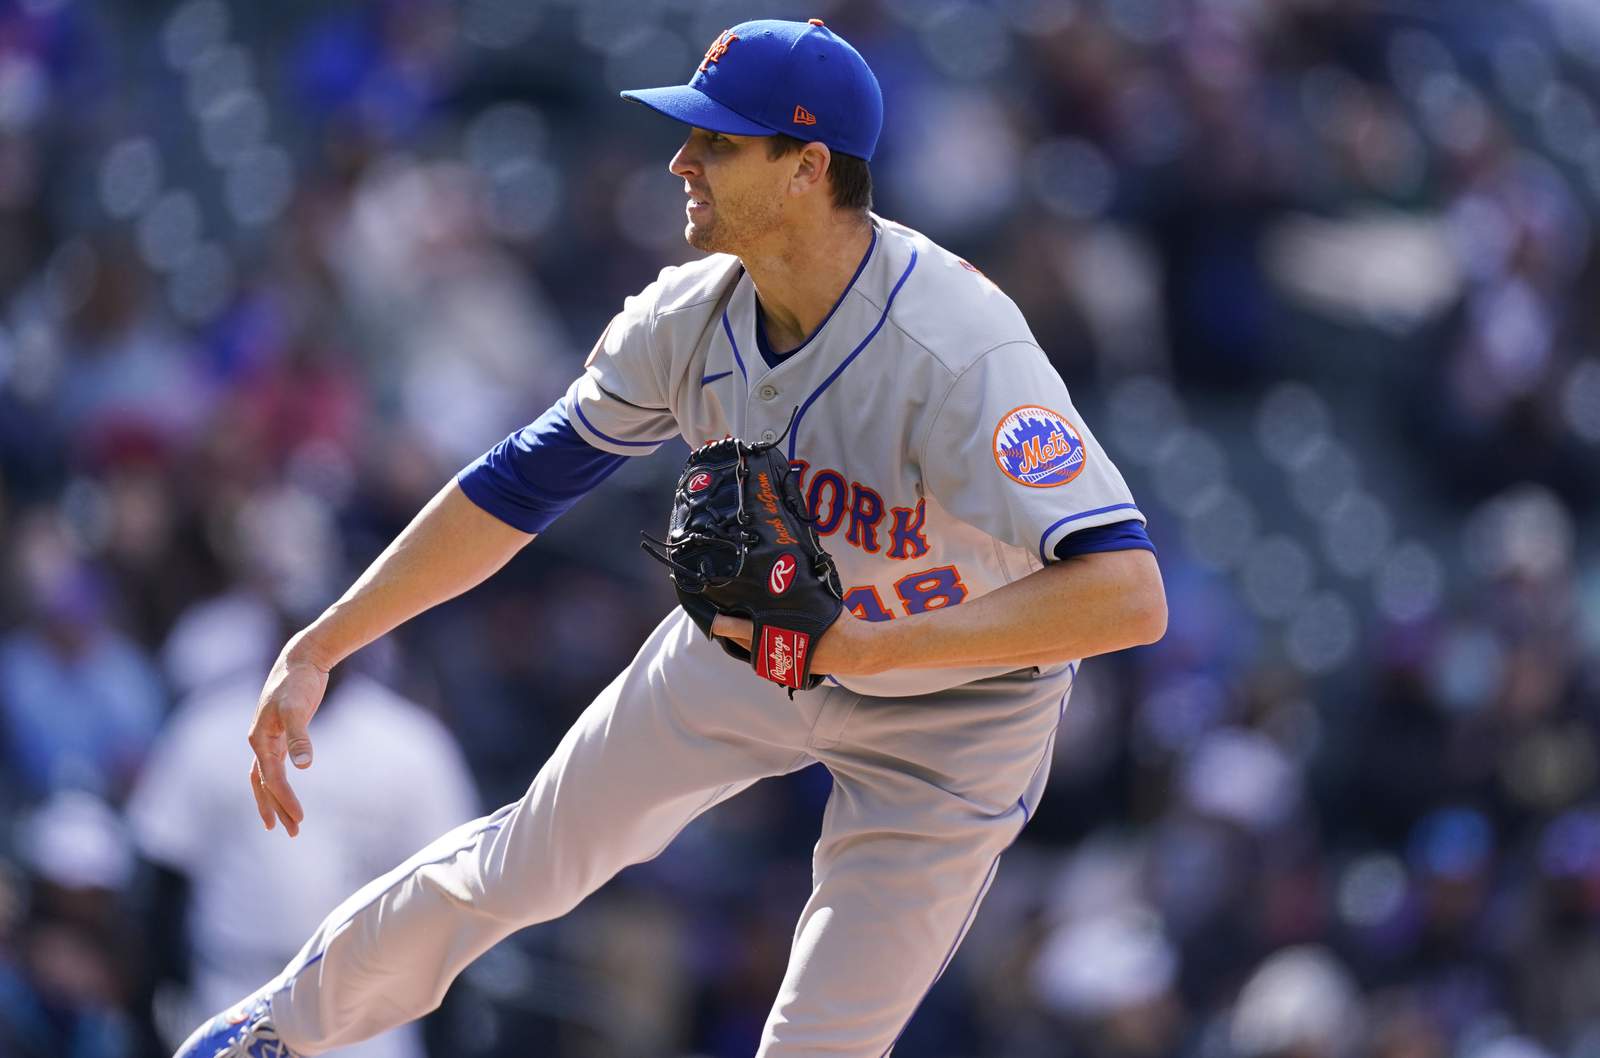 DeGrom strikes out 9 in row as Mets split with Rockies